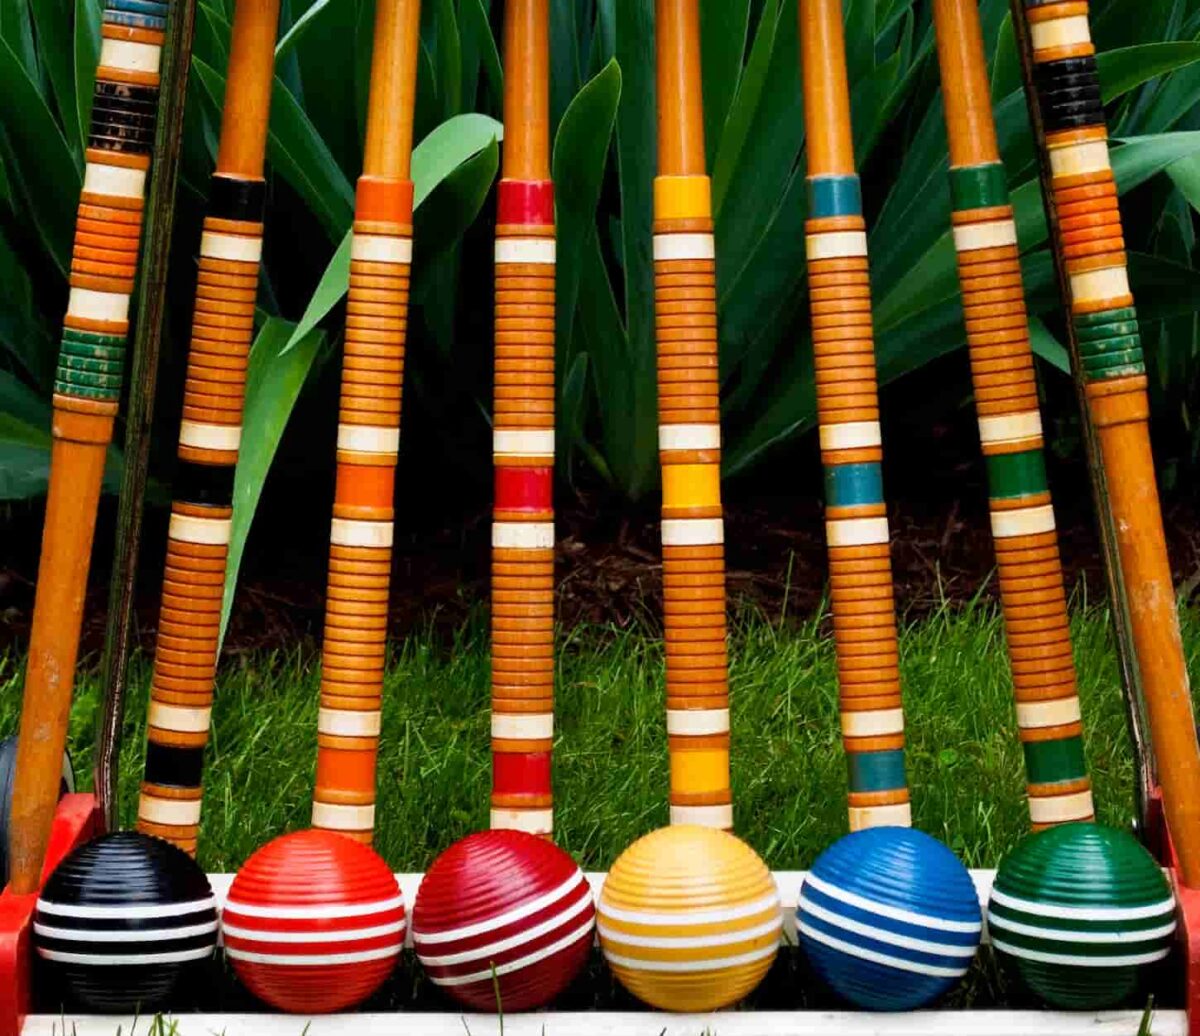 An image of croquet mallets displayed in different colors.